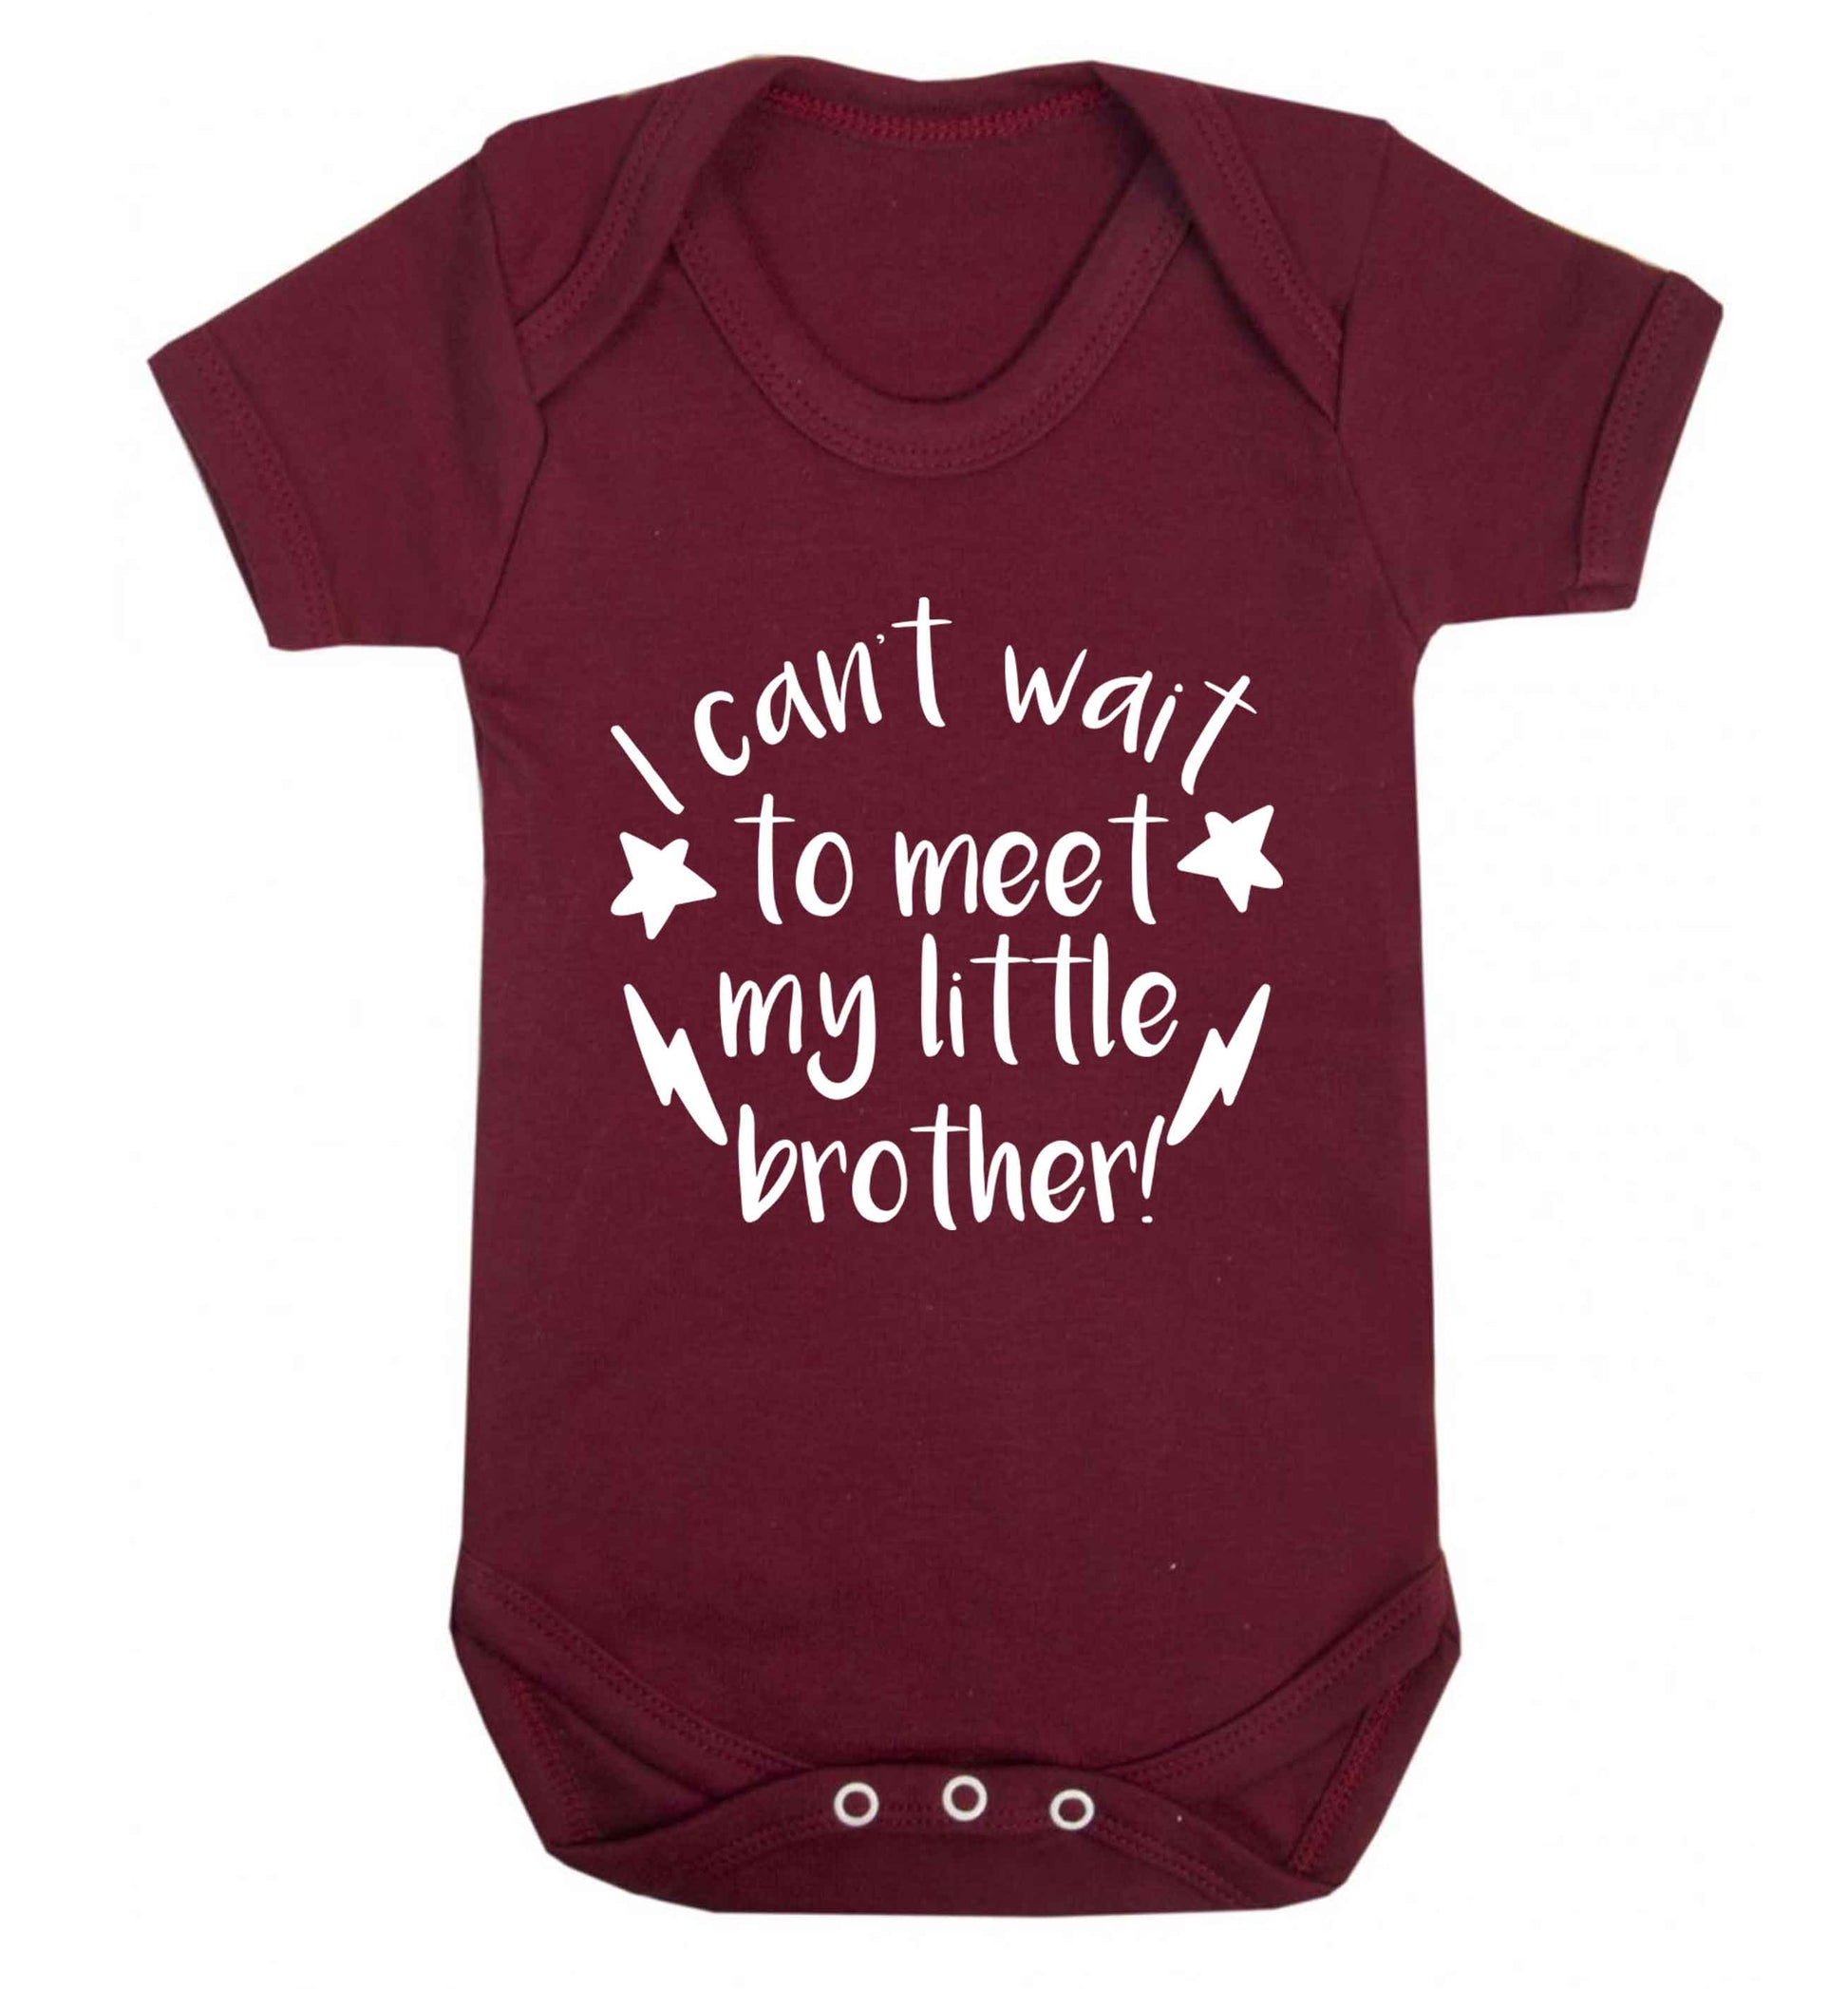 I can't wait to meet my sister! Baby Vest maroon 18-24 months